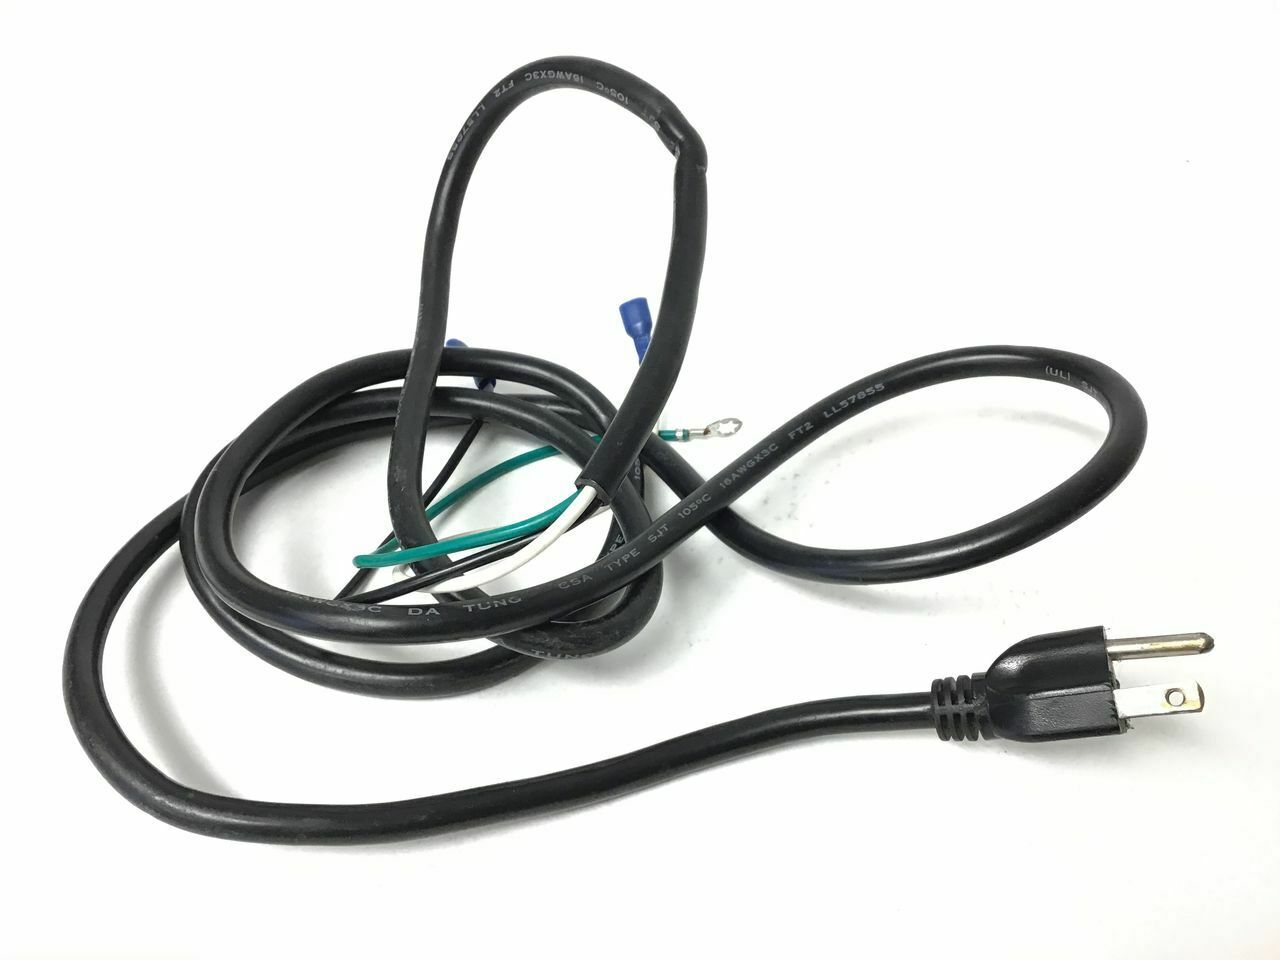 Keys Fitness Treadmill Power Cord Cable Wire 57855